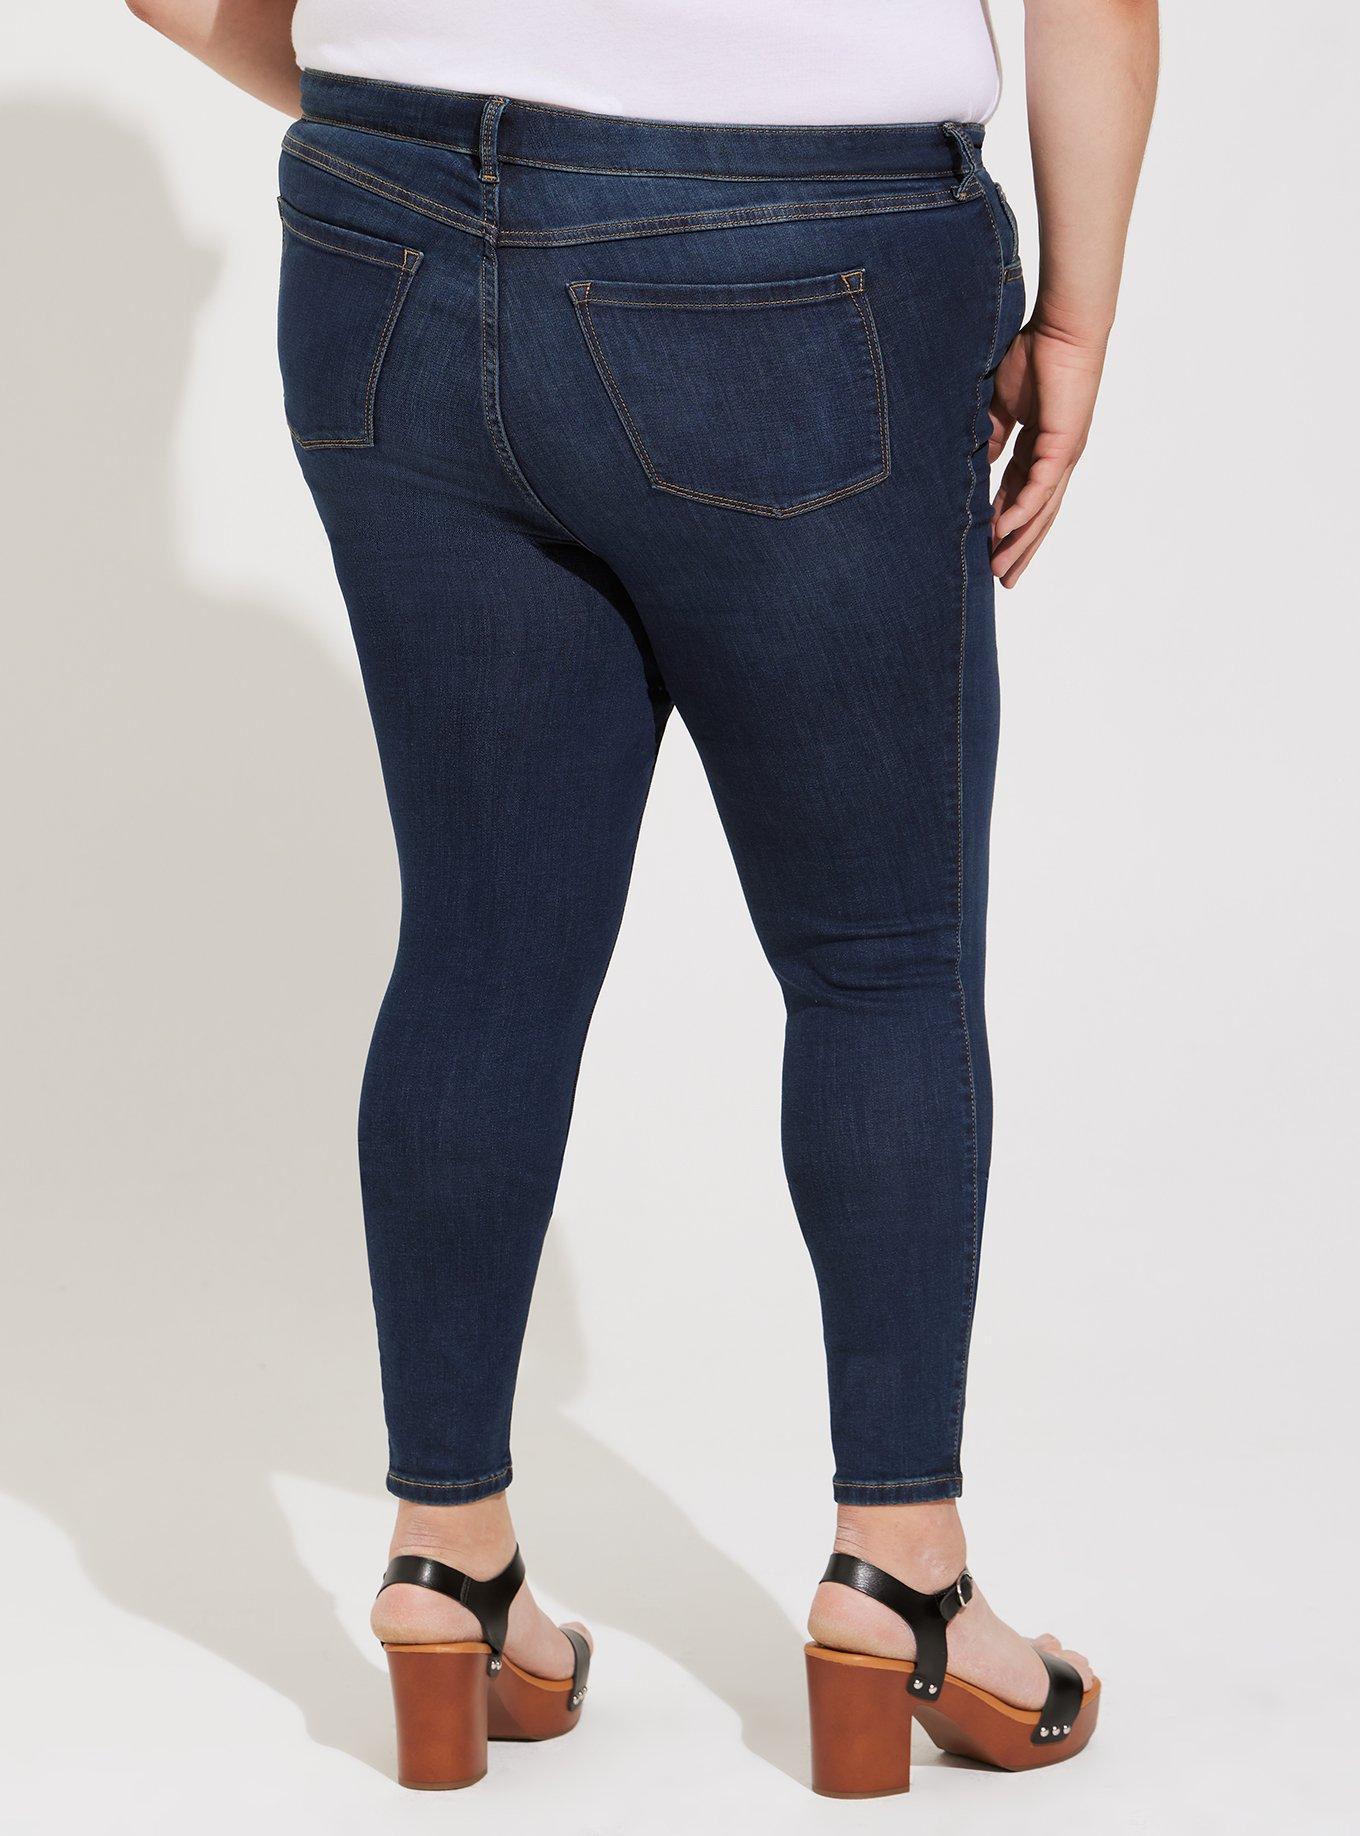 Perfect Jeans to Hide Fupa